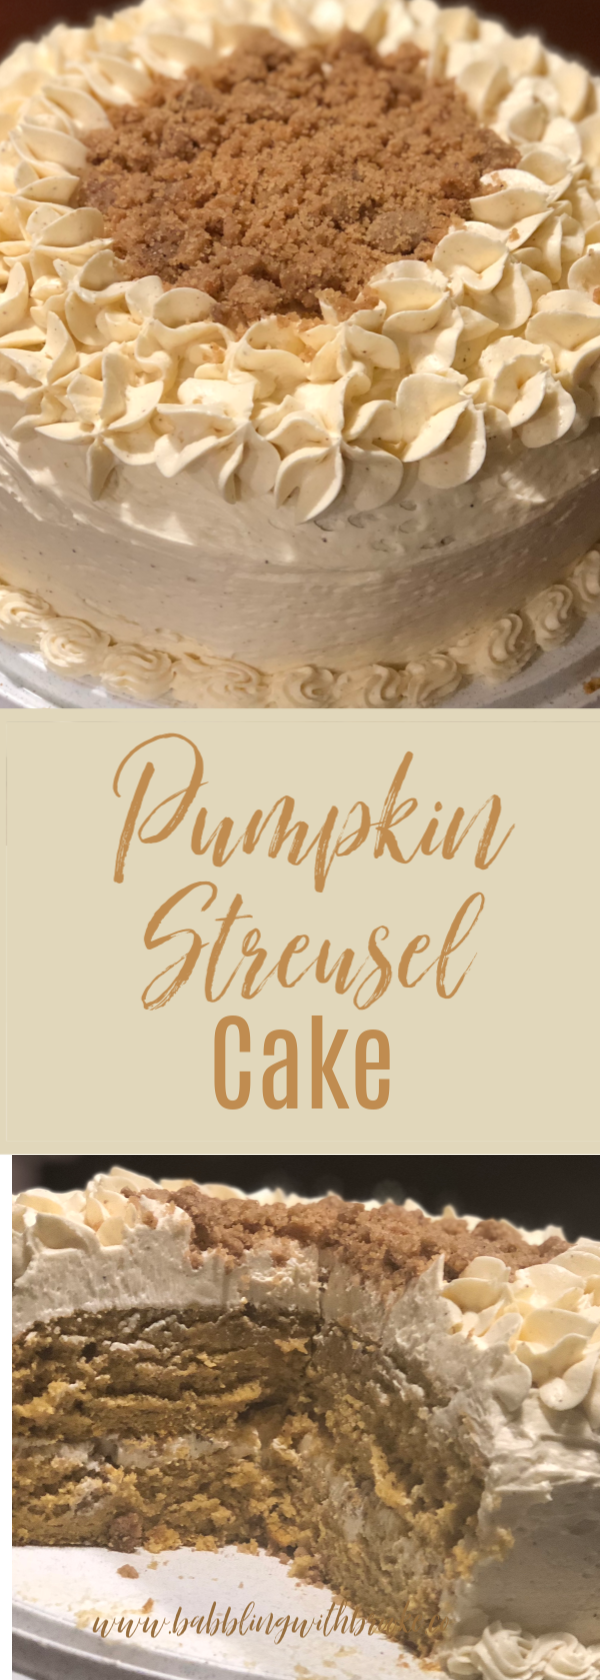 This delicious homemade pumpkin streusel cake is the perfect cake to bring to a family gathering or simply to bake for fun. It is full of flavor and the perfect cake for Fall! #easycake #pumpkincake #pumpkinstreusel #layeredcake #fallcake #holidaycake #familygatheringtreats